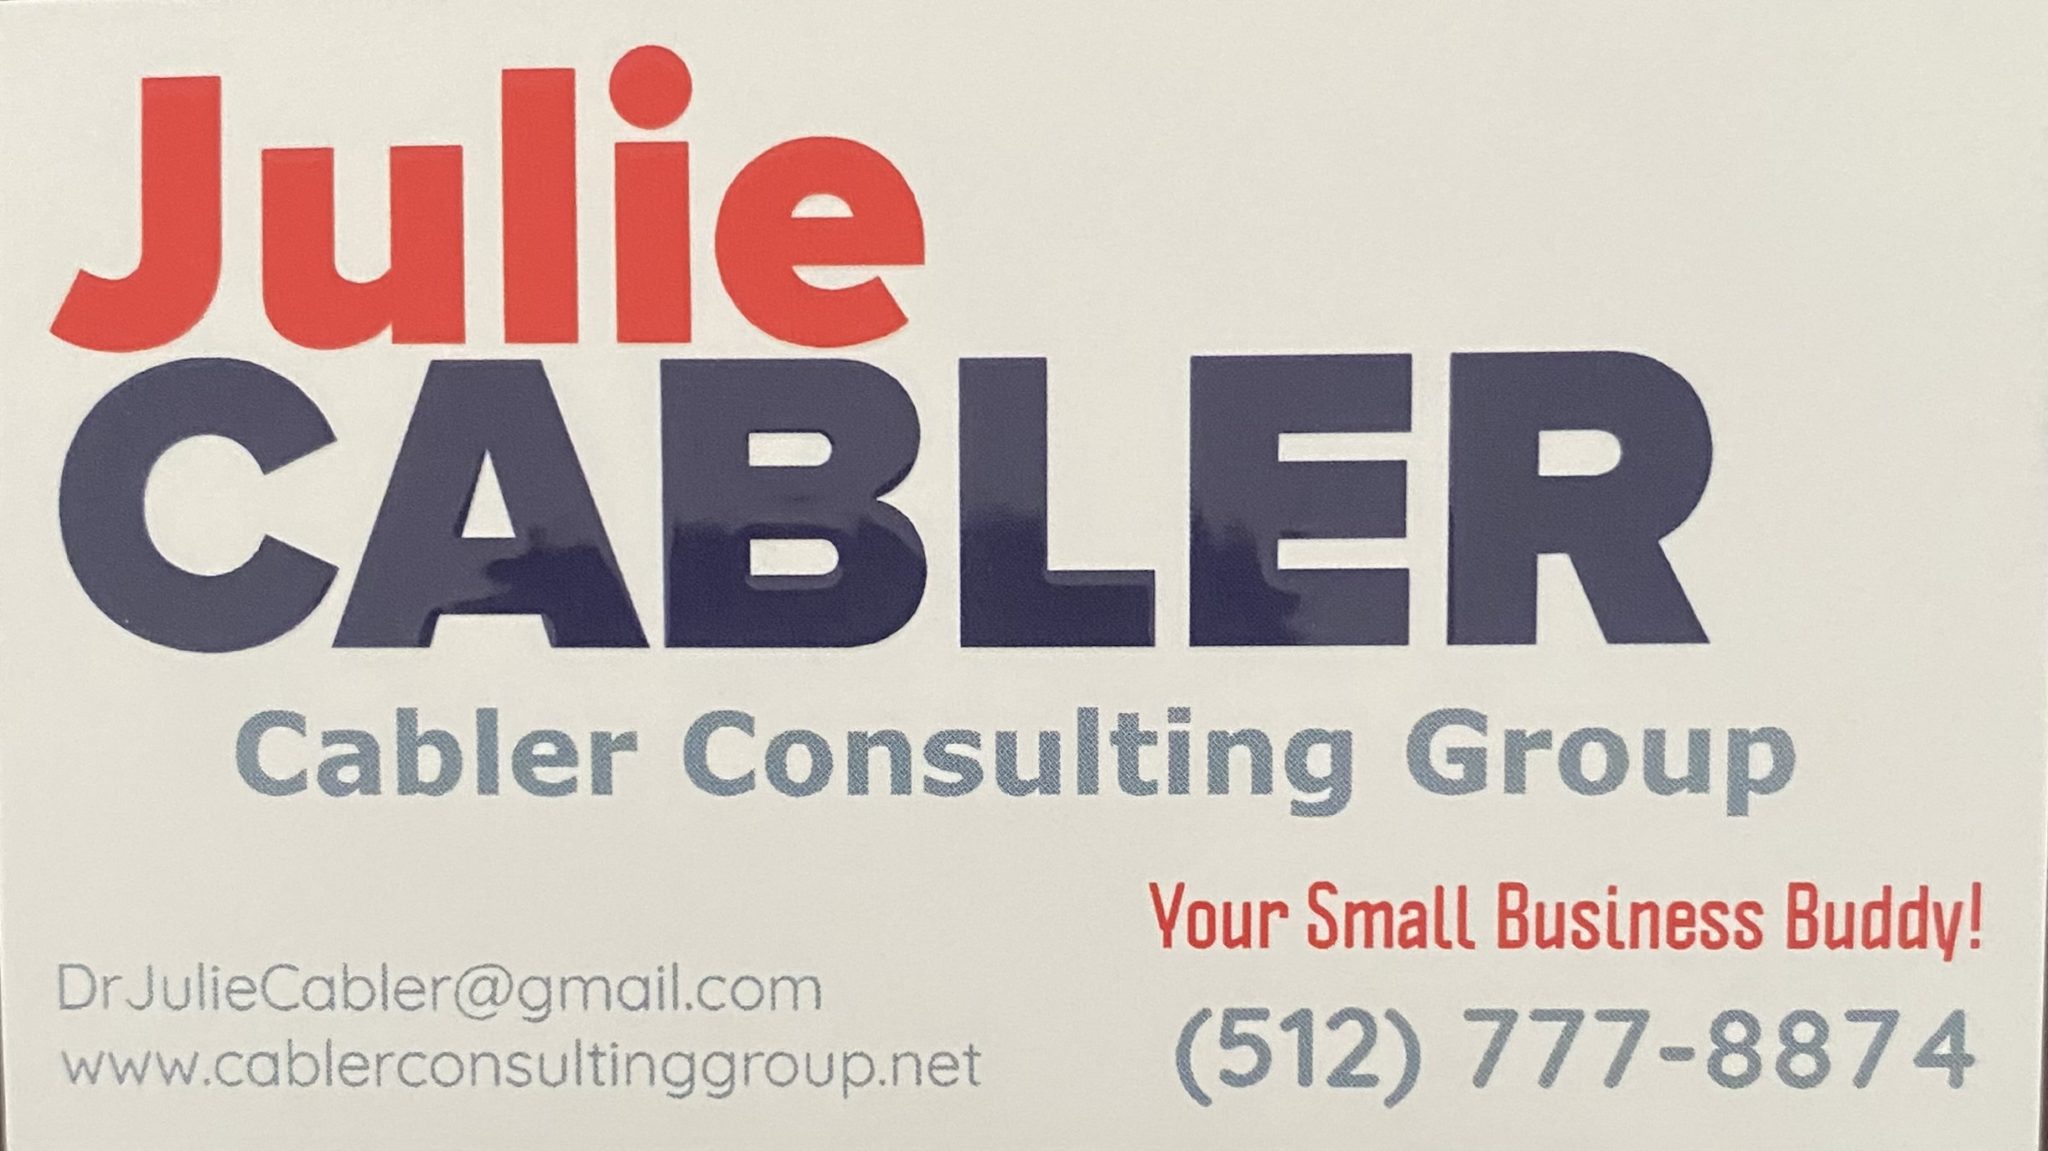 Cabler Consulting Group Waco - Julie Cabler, Owner